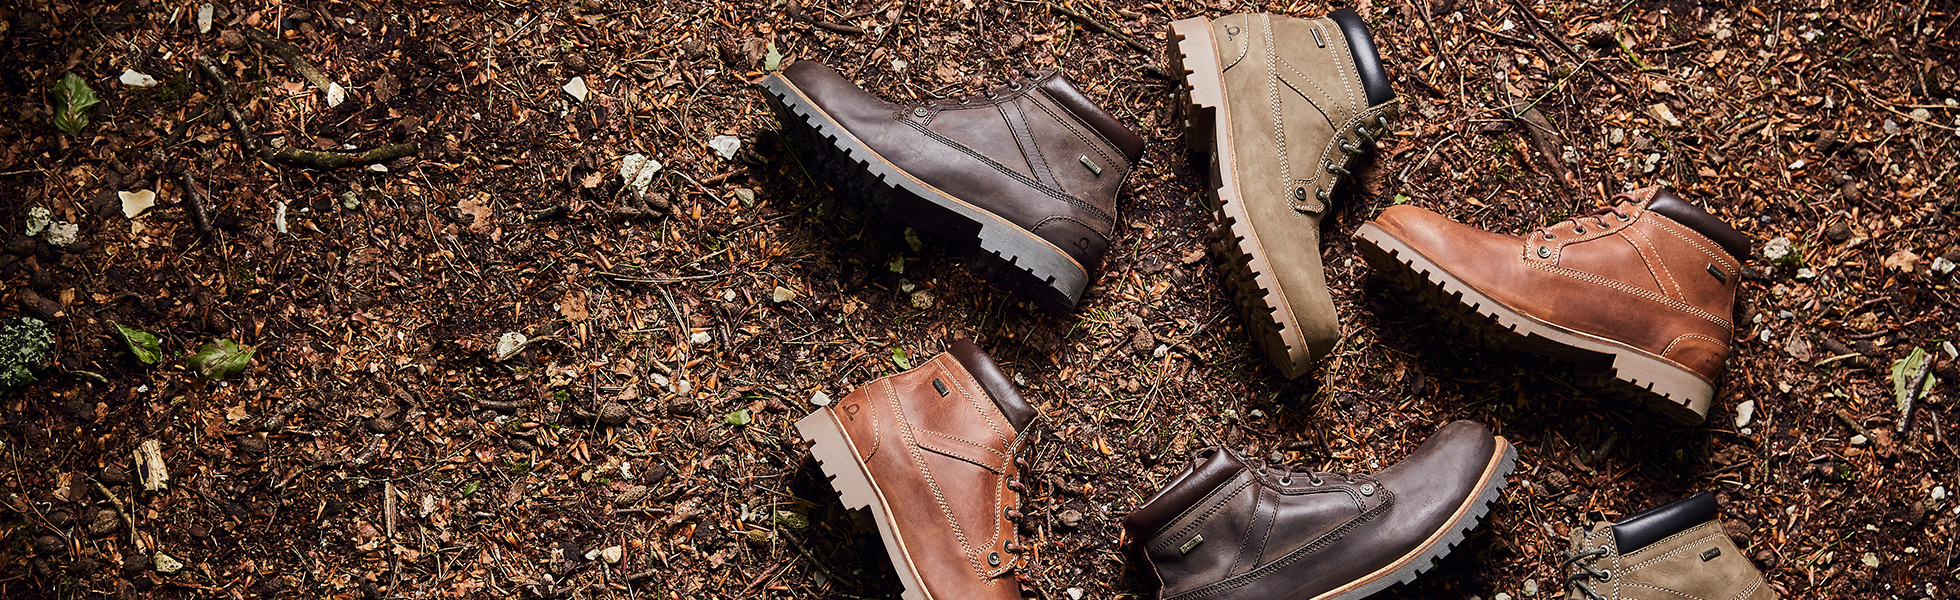 Conquer the Elements in Style with Mens Waterproof Boots